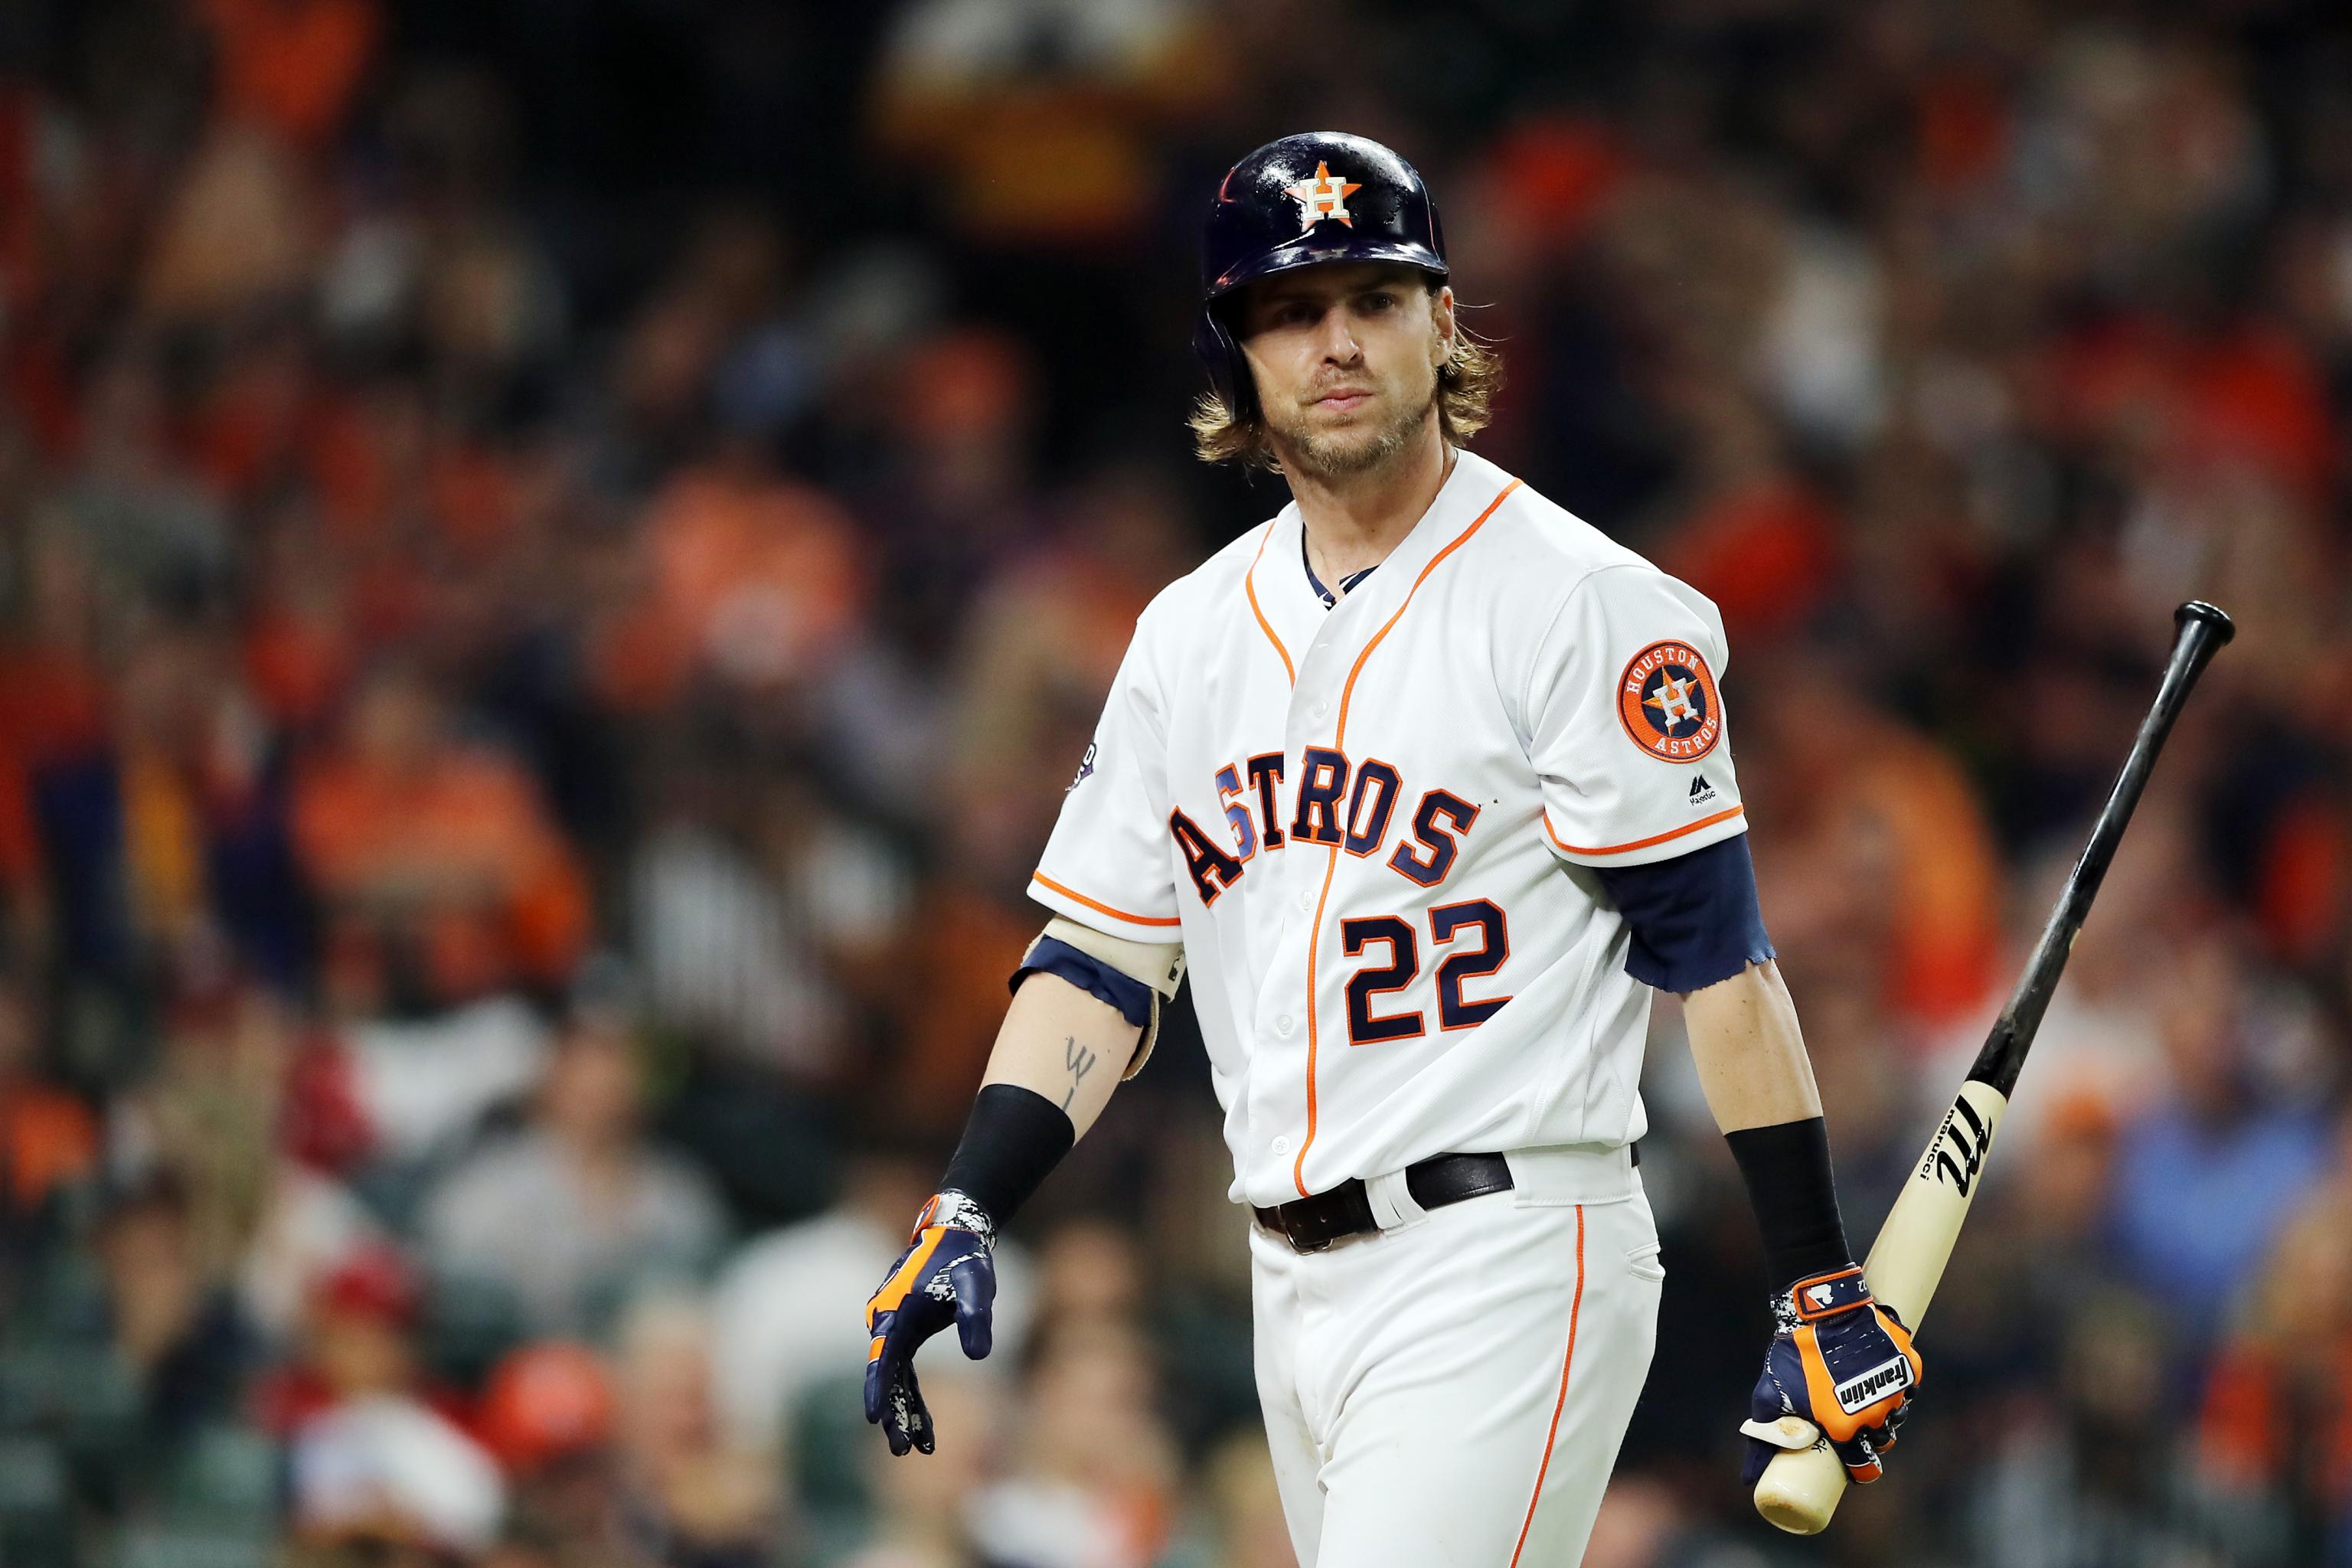 MLB Rumors: Josh Reddick Agrees To 4-Year Contract With Astros